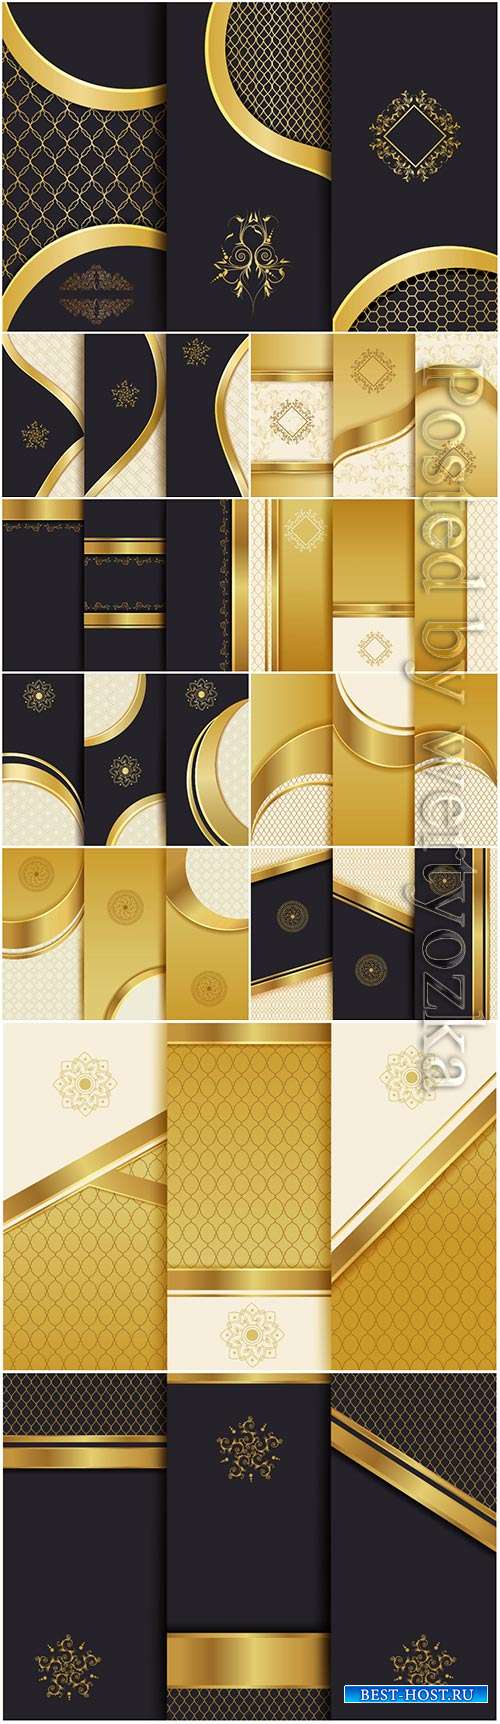 Luxury backgrounds for packaging, vector templates